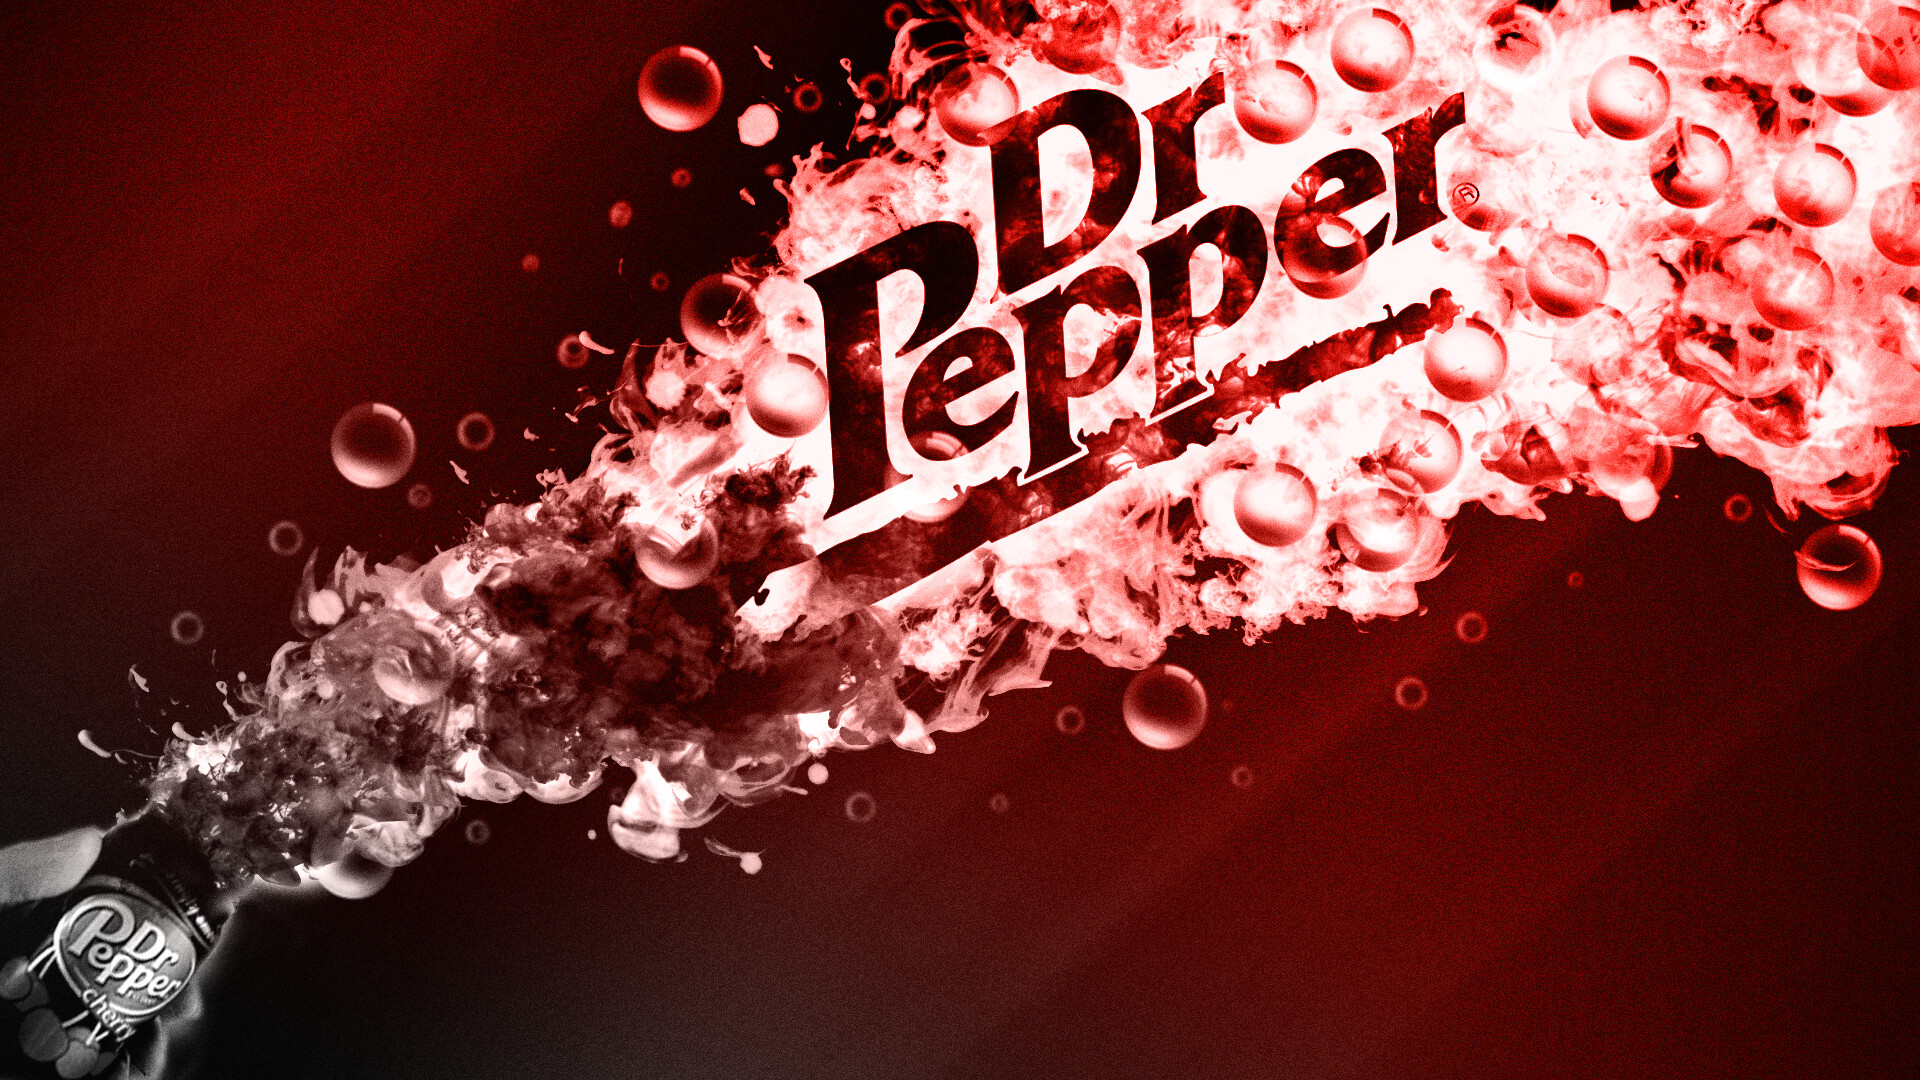 Dr pepper 1080P 2k 4k Full HD Wallpapers Backgrounds Free Download   Wallpaper Crafter